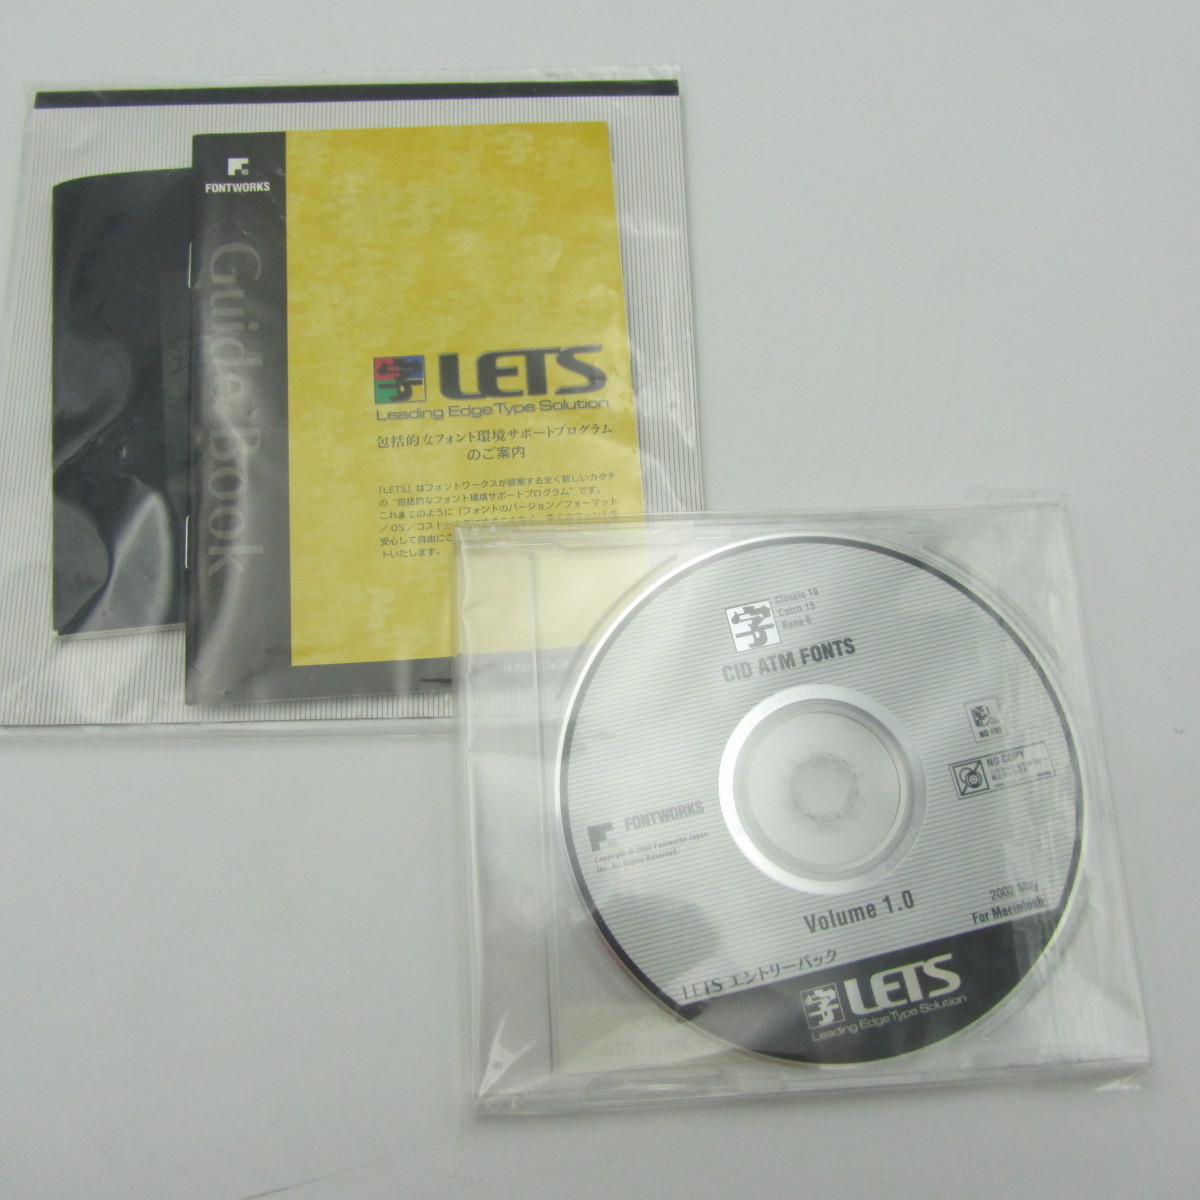 NA-181●LETS CID ATM FONTS Fontworks エントリパック Volume 1.0 Macintosh/leading edge type solution フォント_画像2